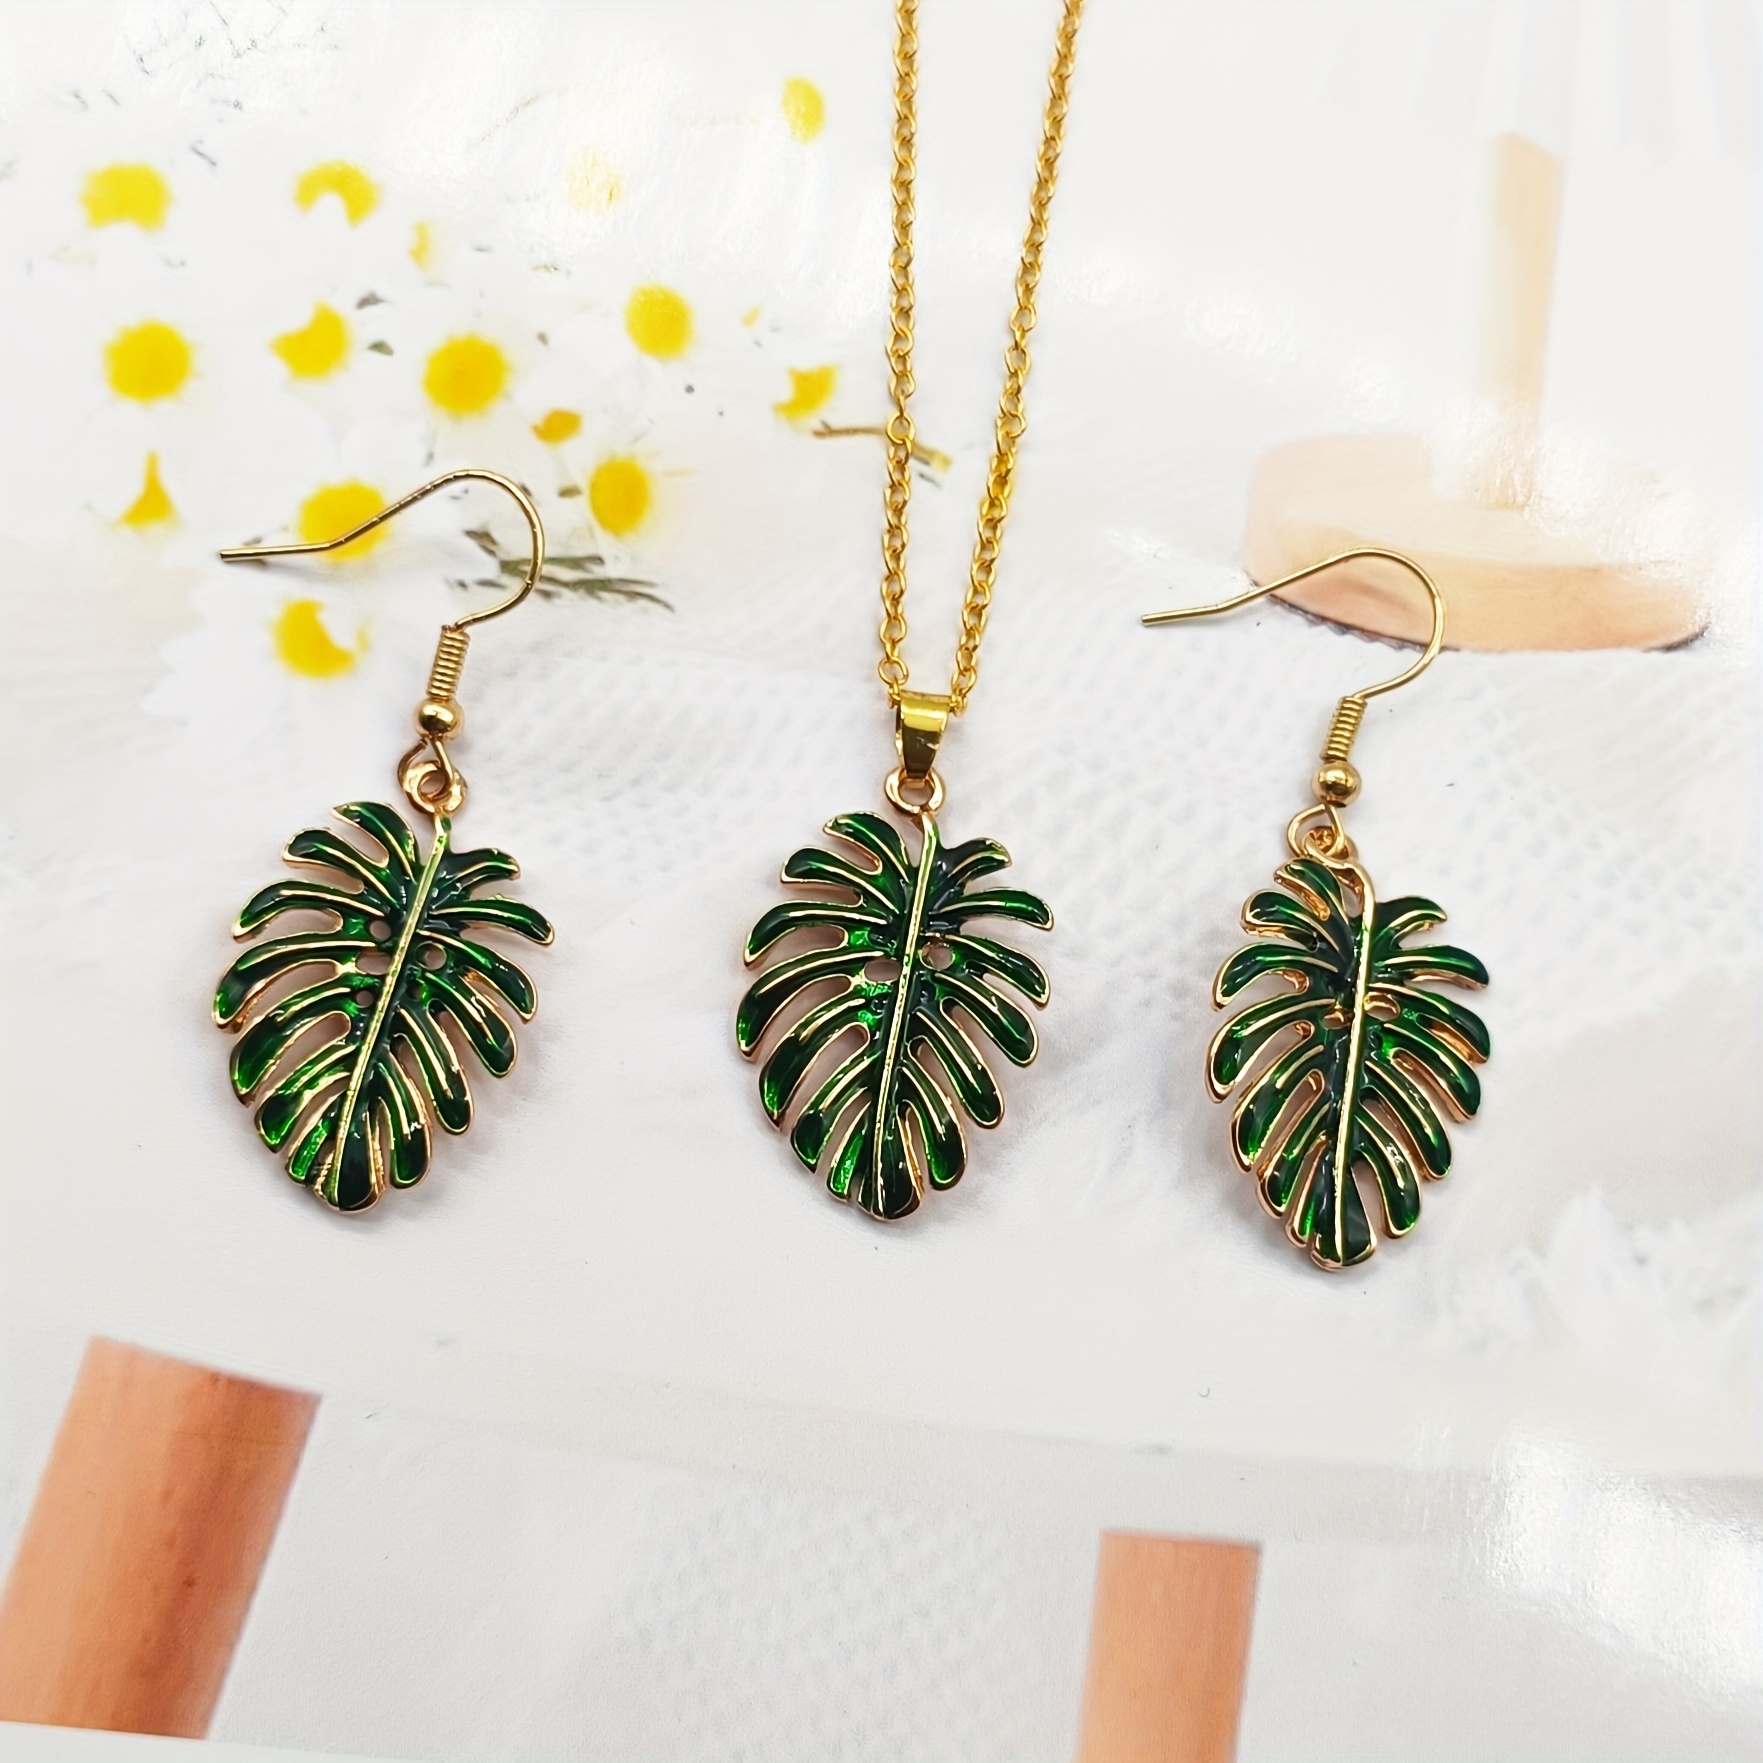 

Tropical Palm Leaf Jewelry Set, Enamel Green Drop Earrings And Pendant Necklace, Elegant And Simple Style, Hollowed-out Banana Leaf Design, Fashion Jewelry For Women